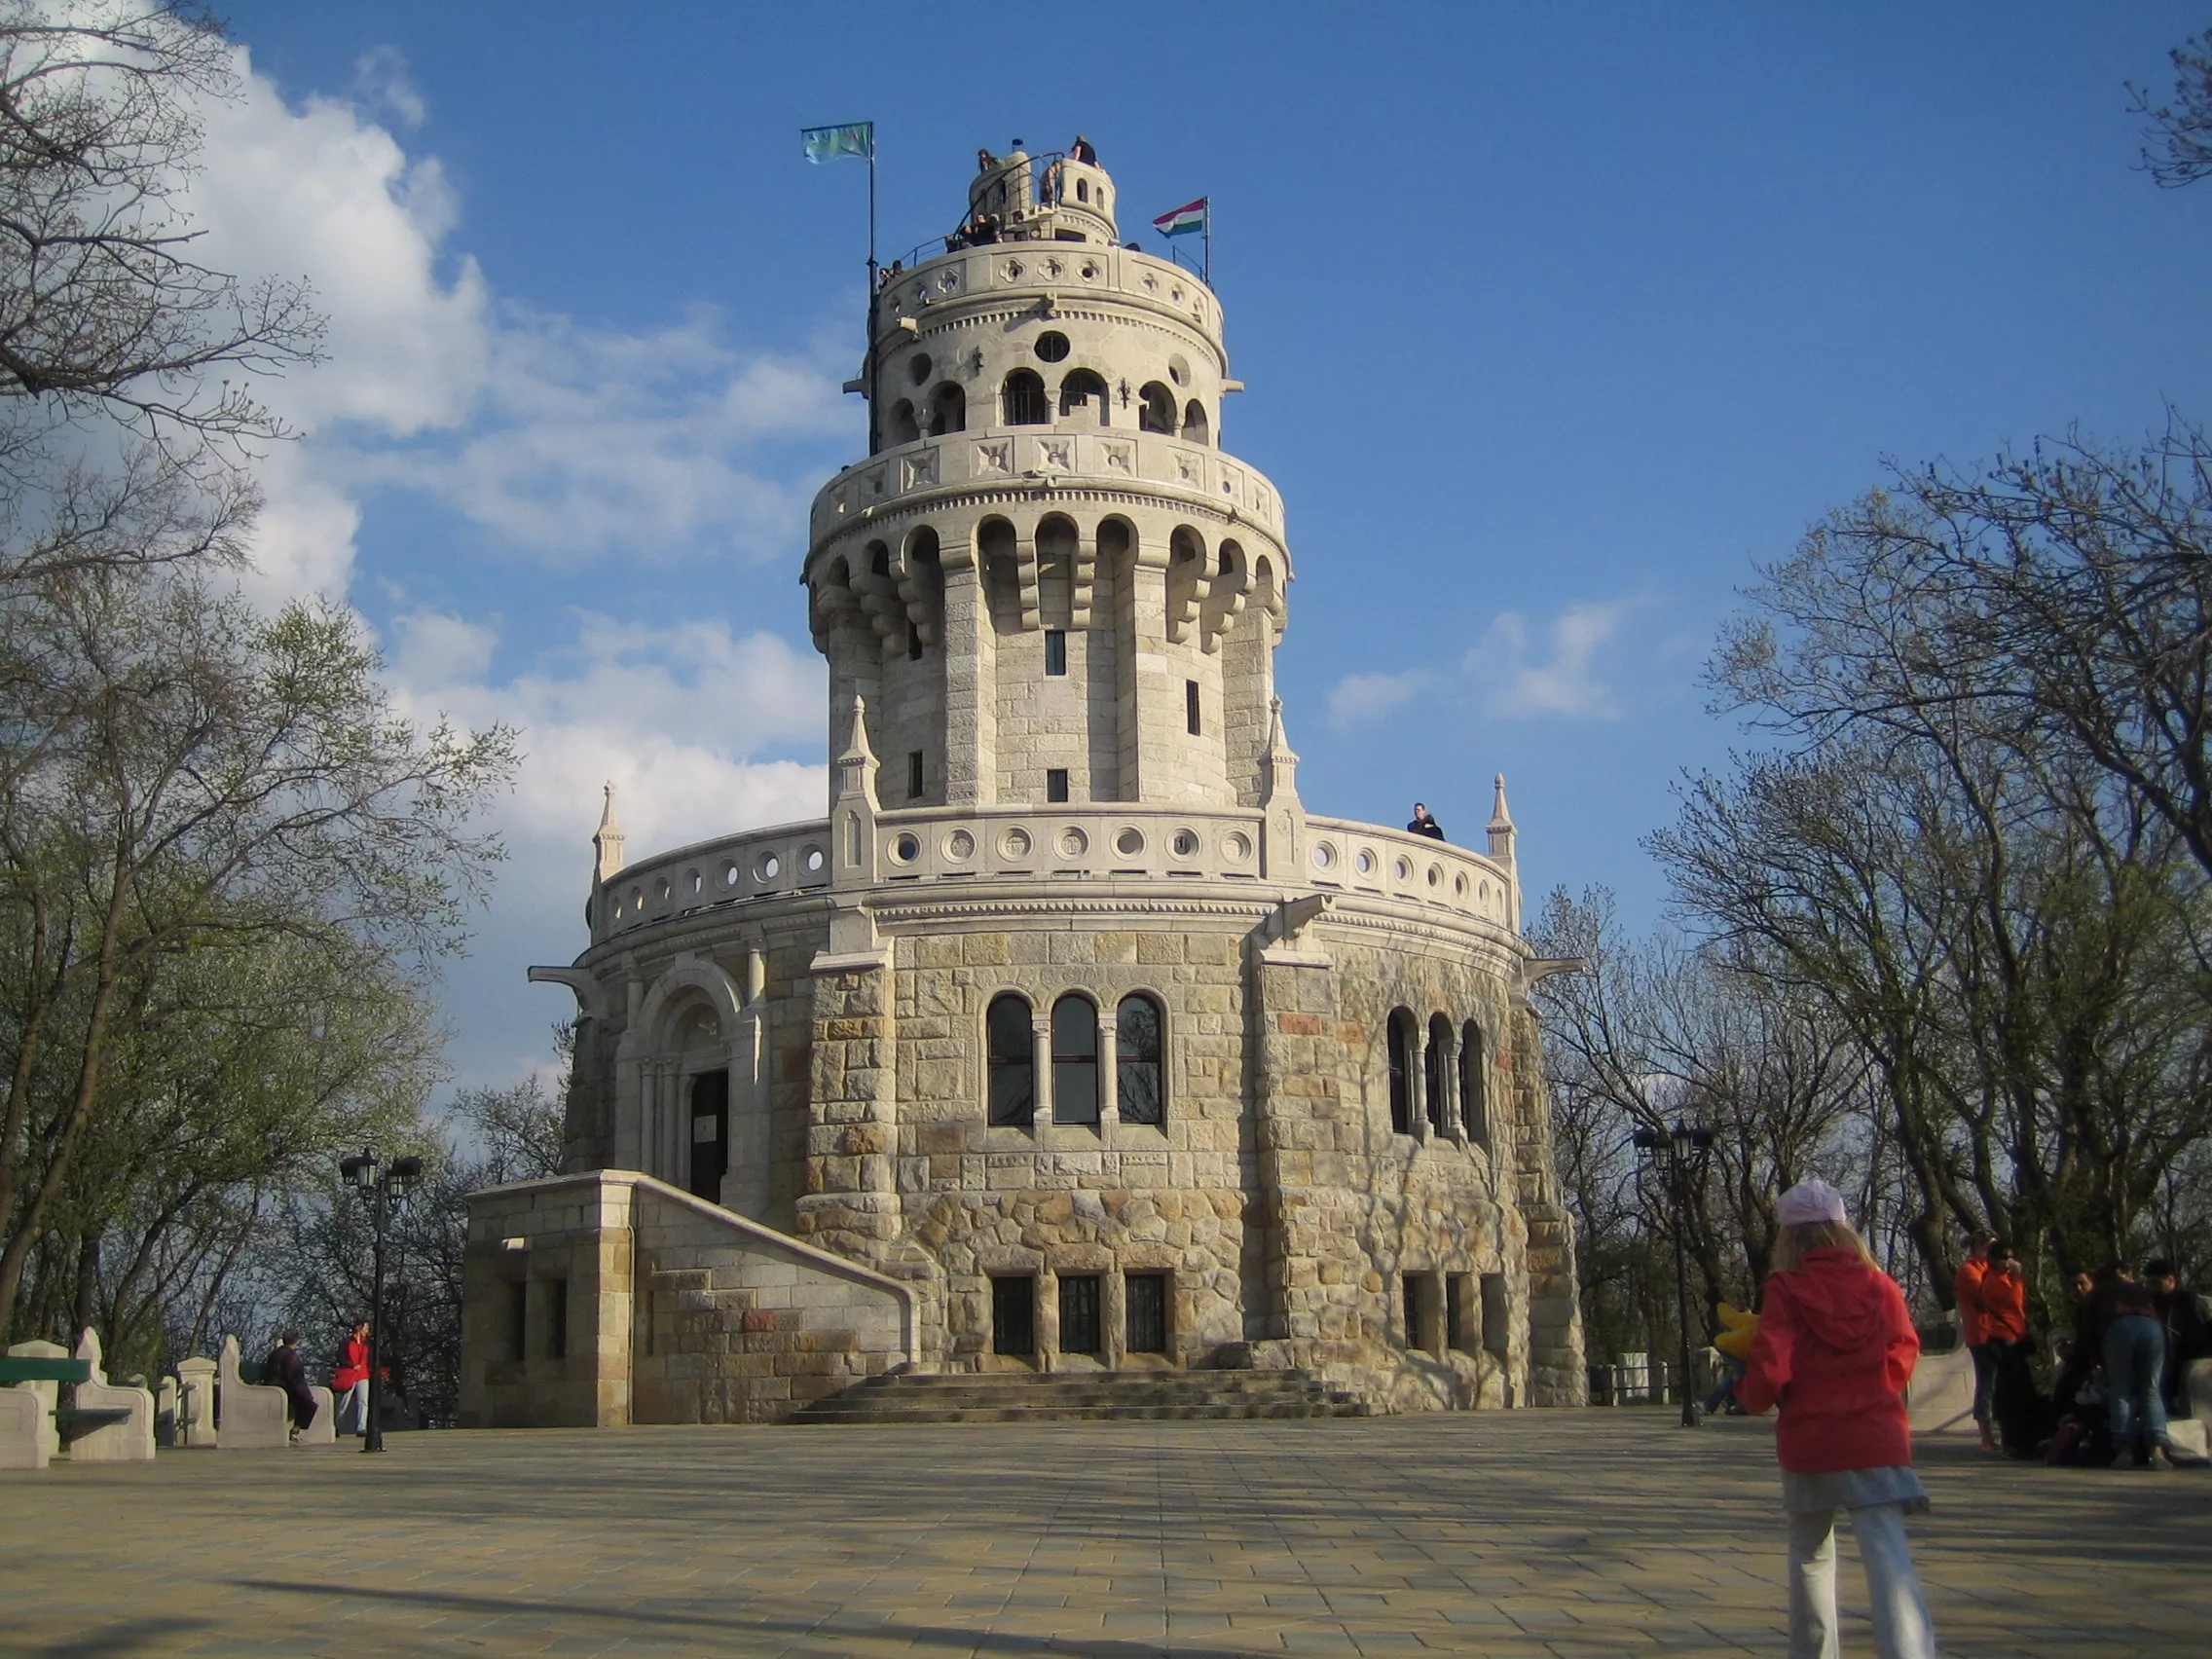 Elizabeth Tower in Hungary, Europe | Architecture - Rated 3.9